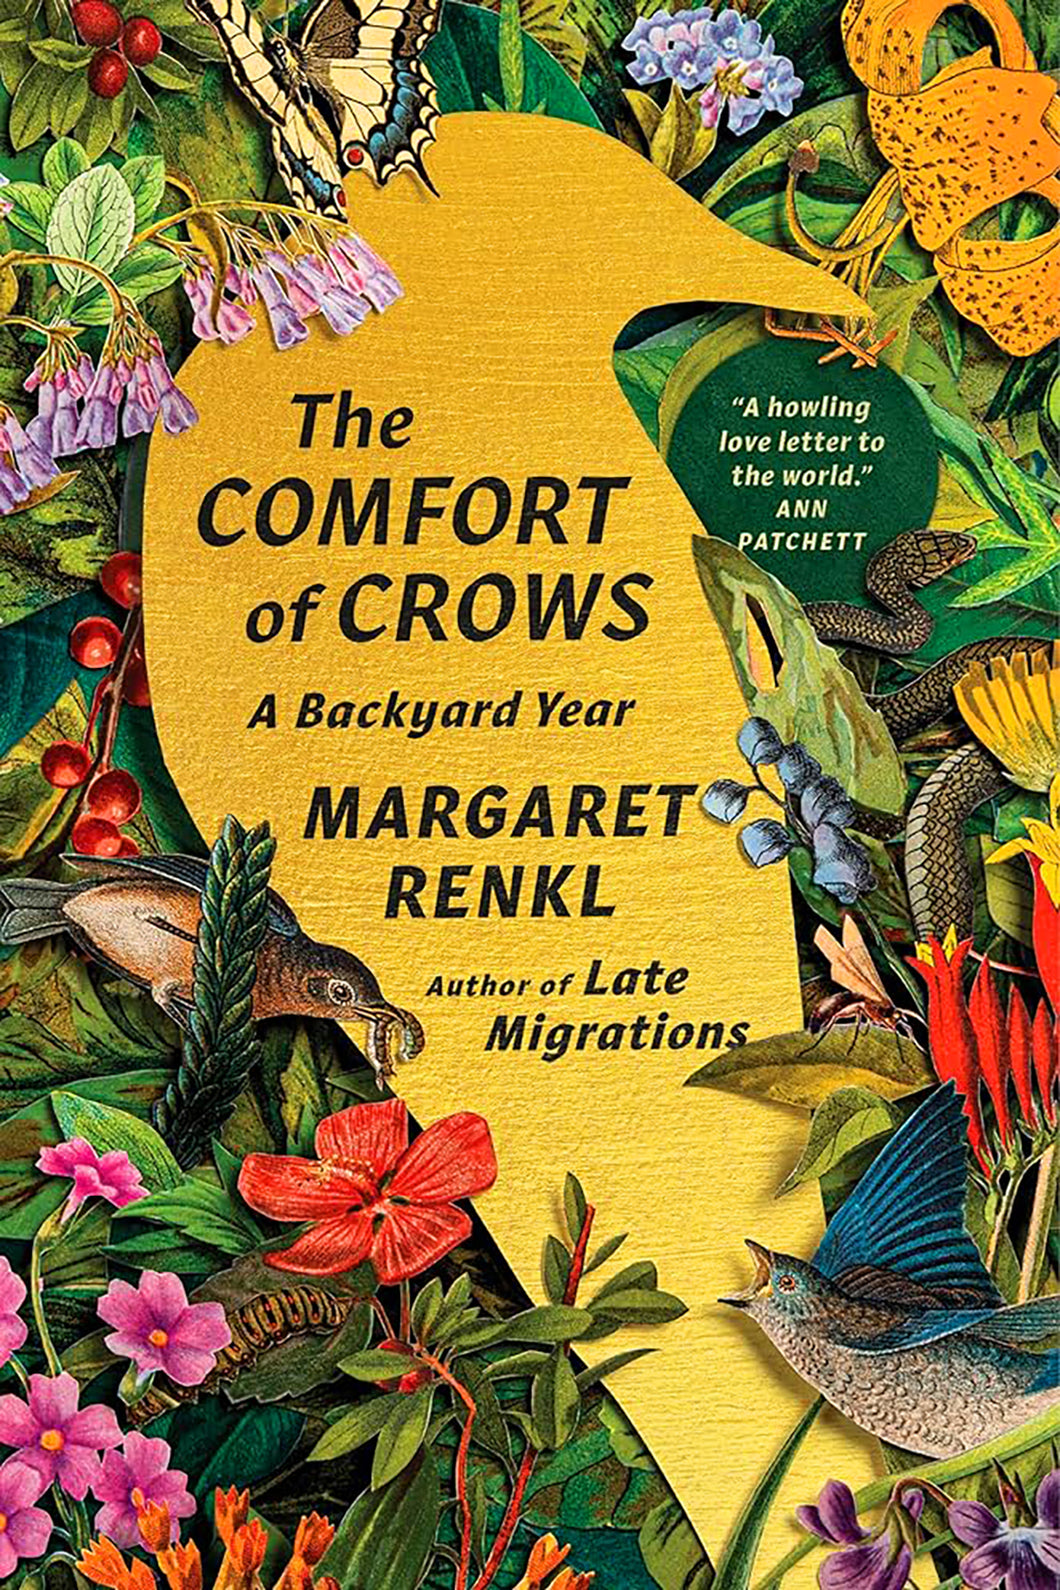 The Comfort of Crows by Margaret Renkl / BOOK OR BUNDLE - Starting at $32!